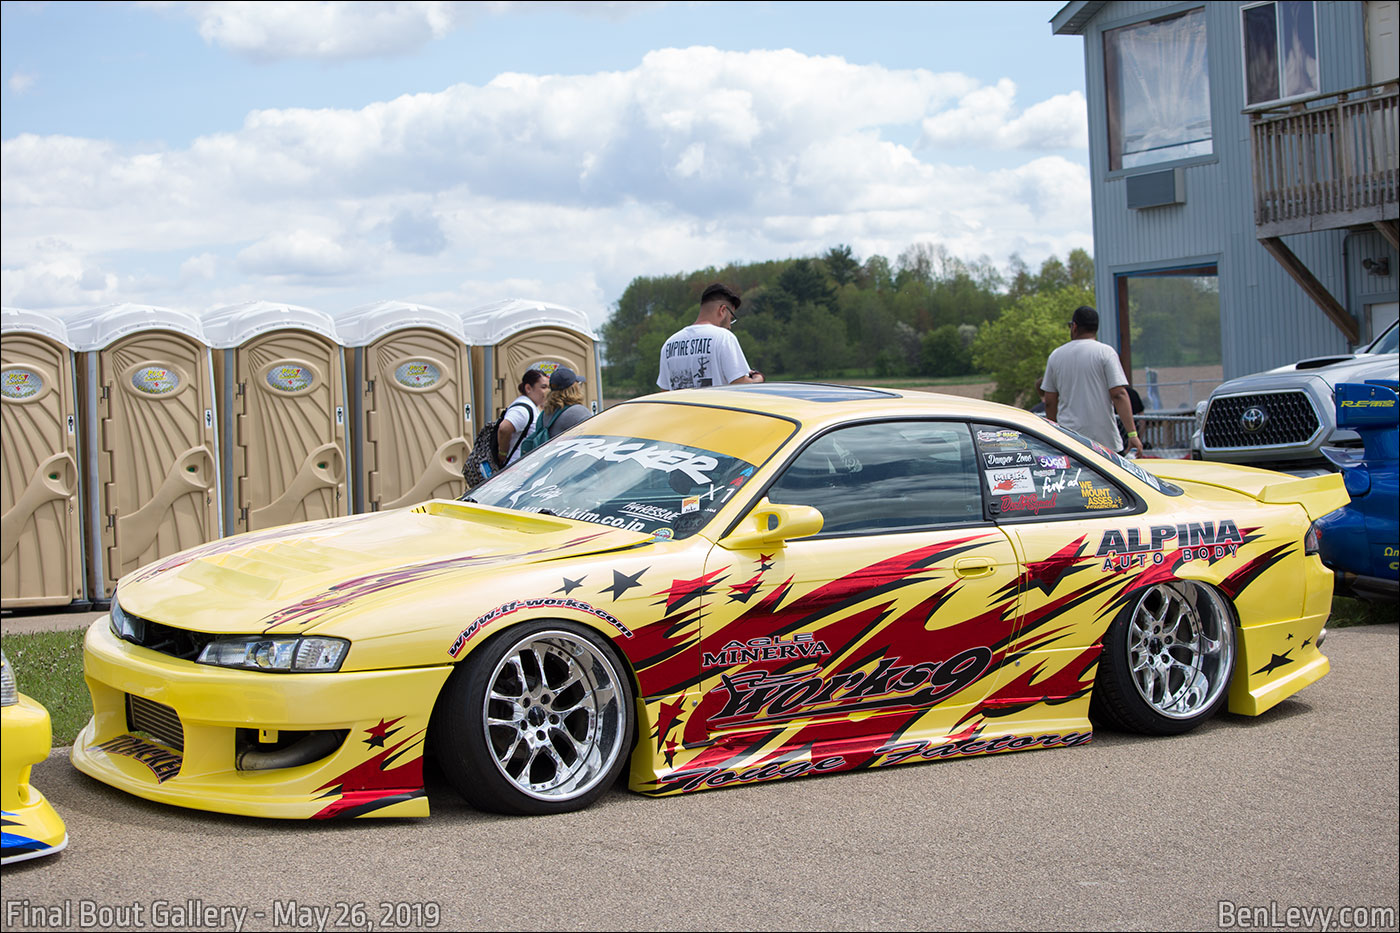 Yellow Nissan 240SX on display at Final Bout